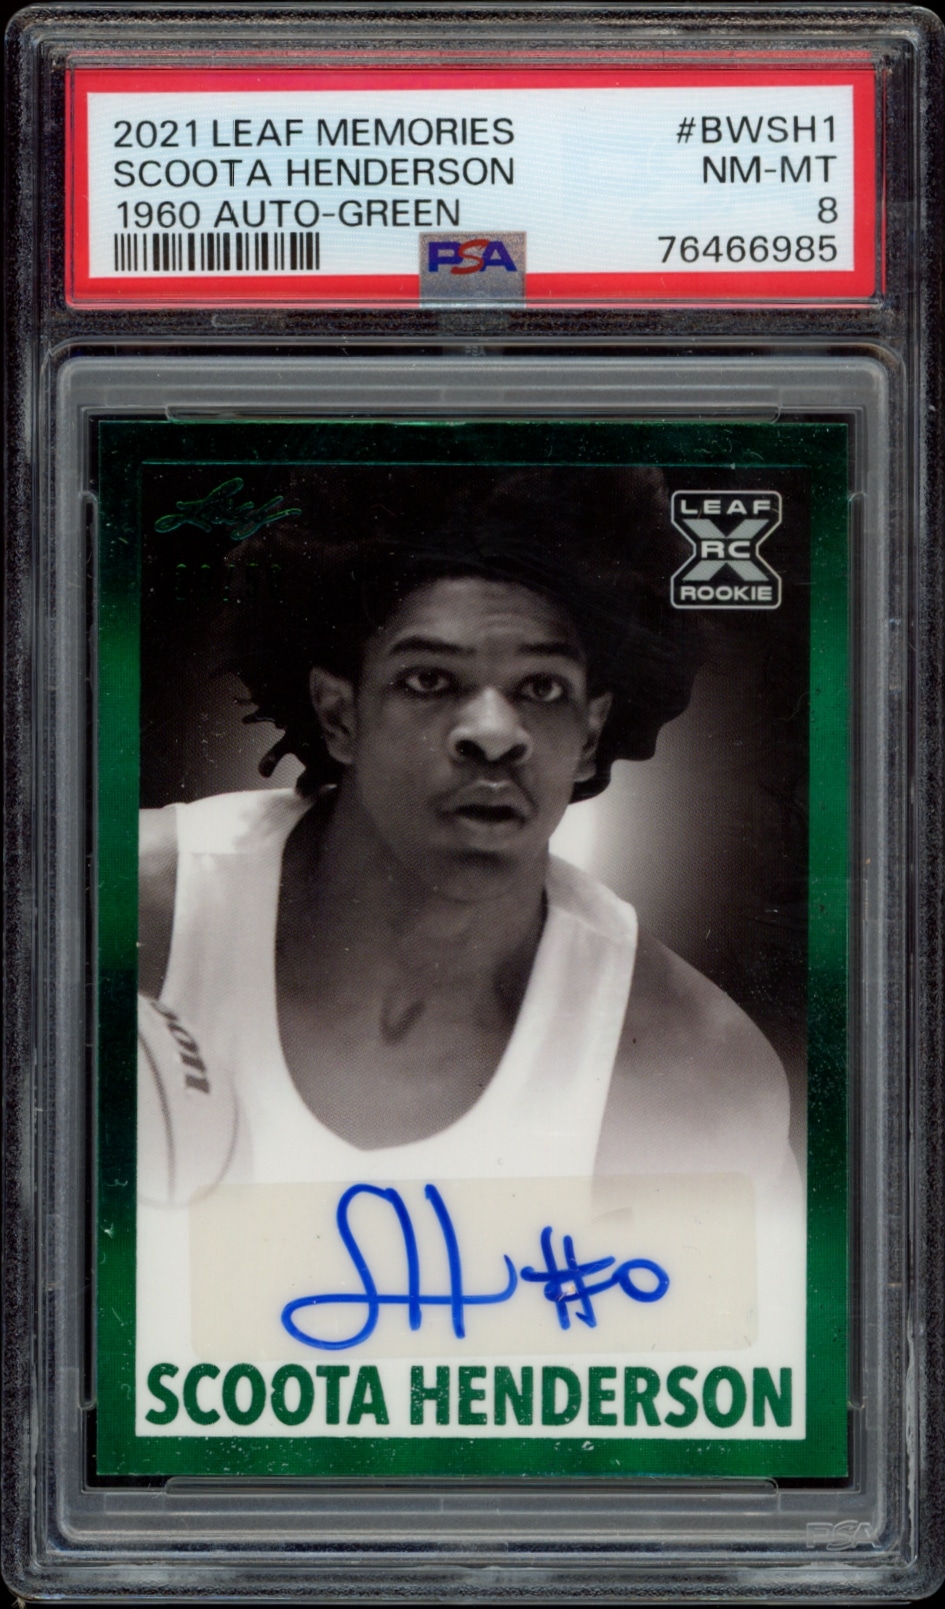 Scoota Hendersons autographed 2021 Leaf Memories card, graded NM-MT 8 by Professional Sports Authenticator.